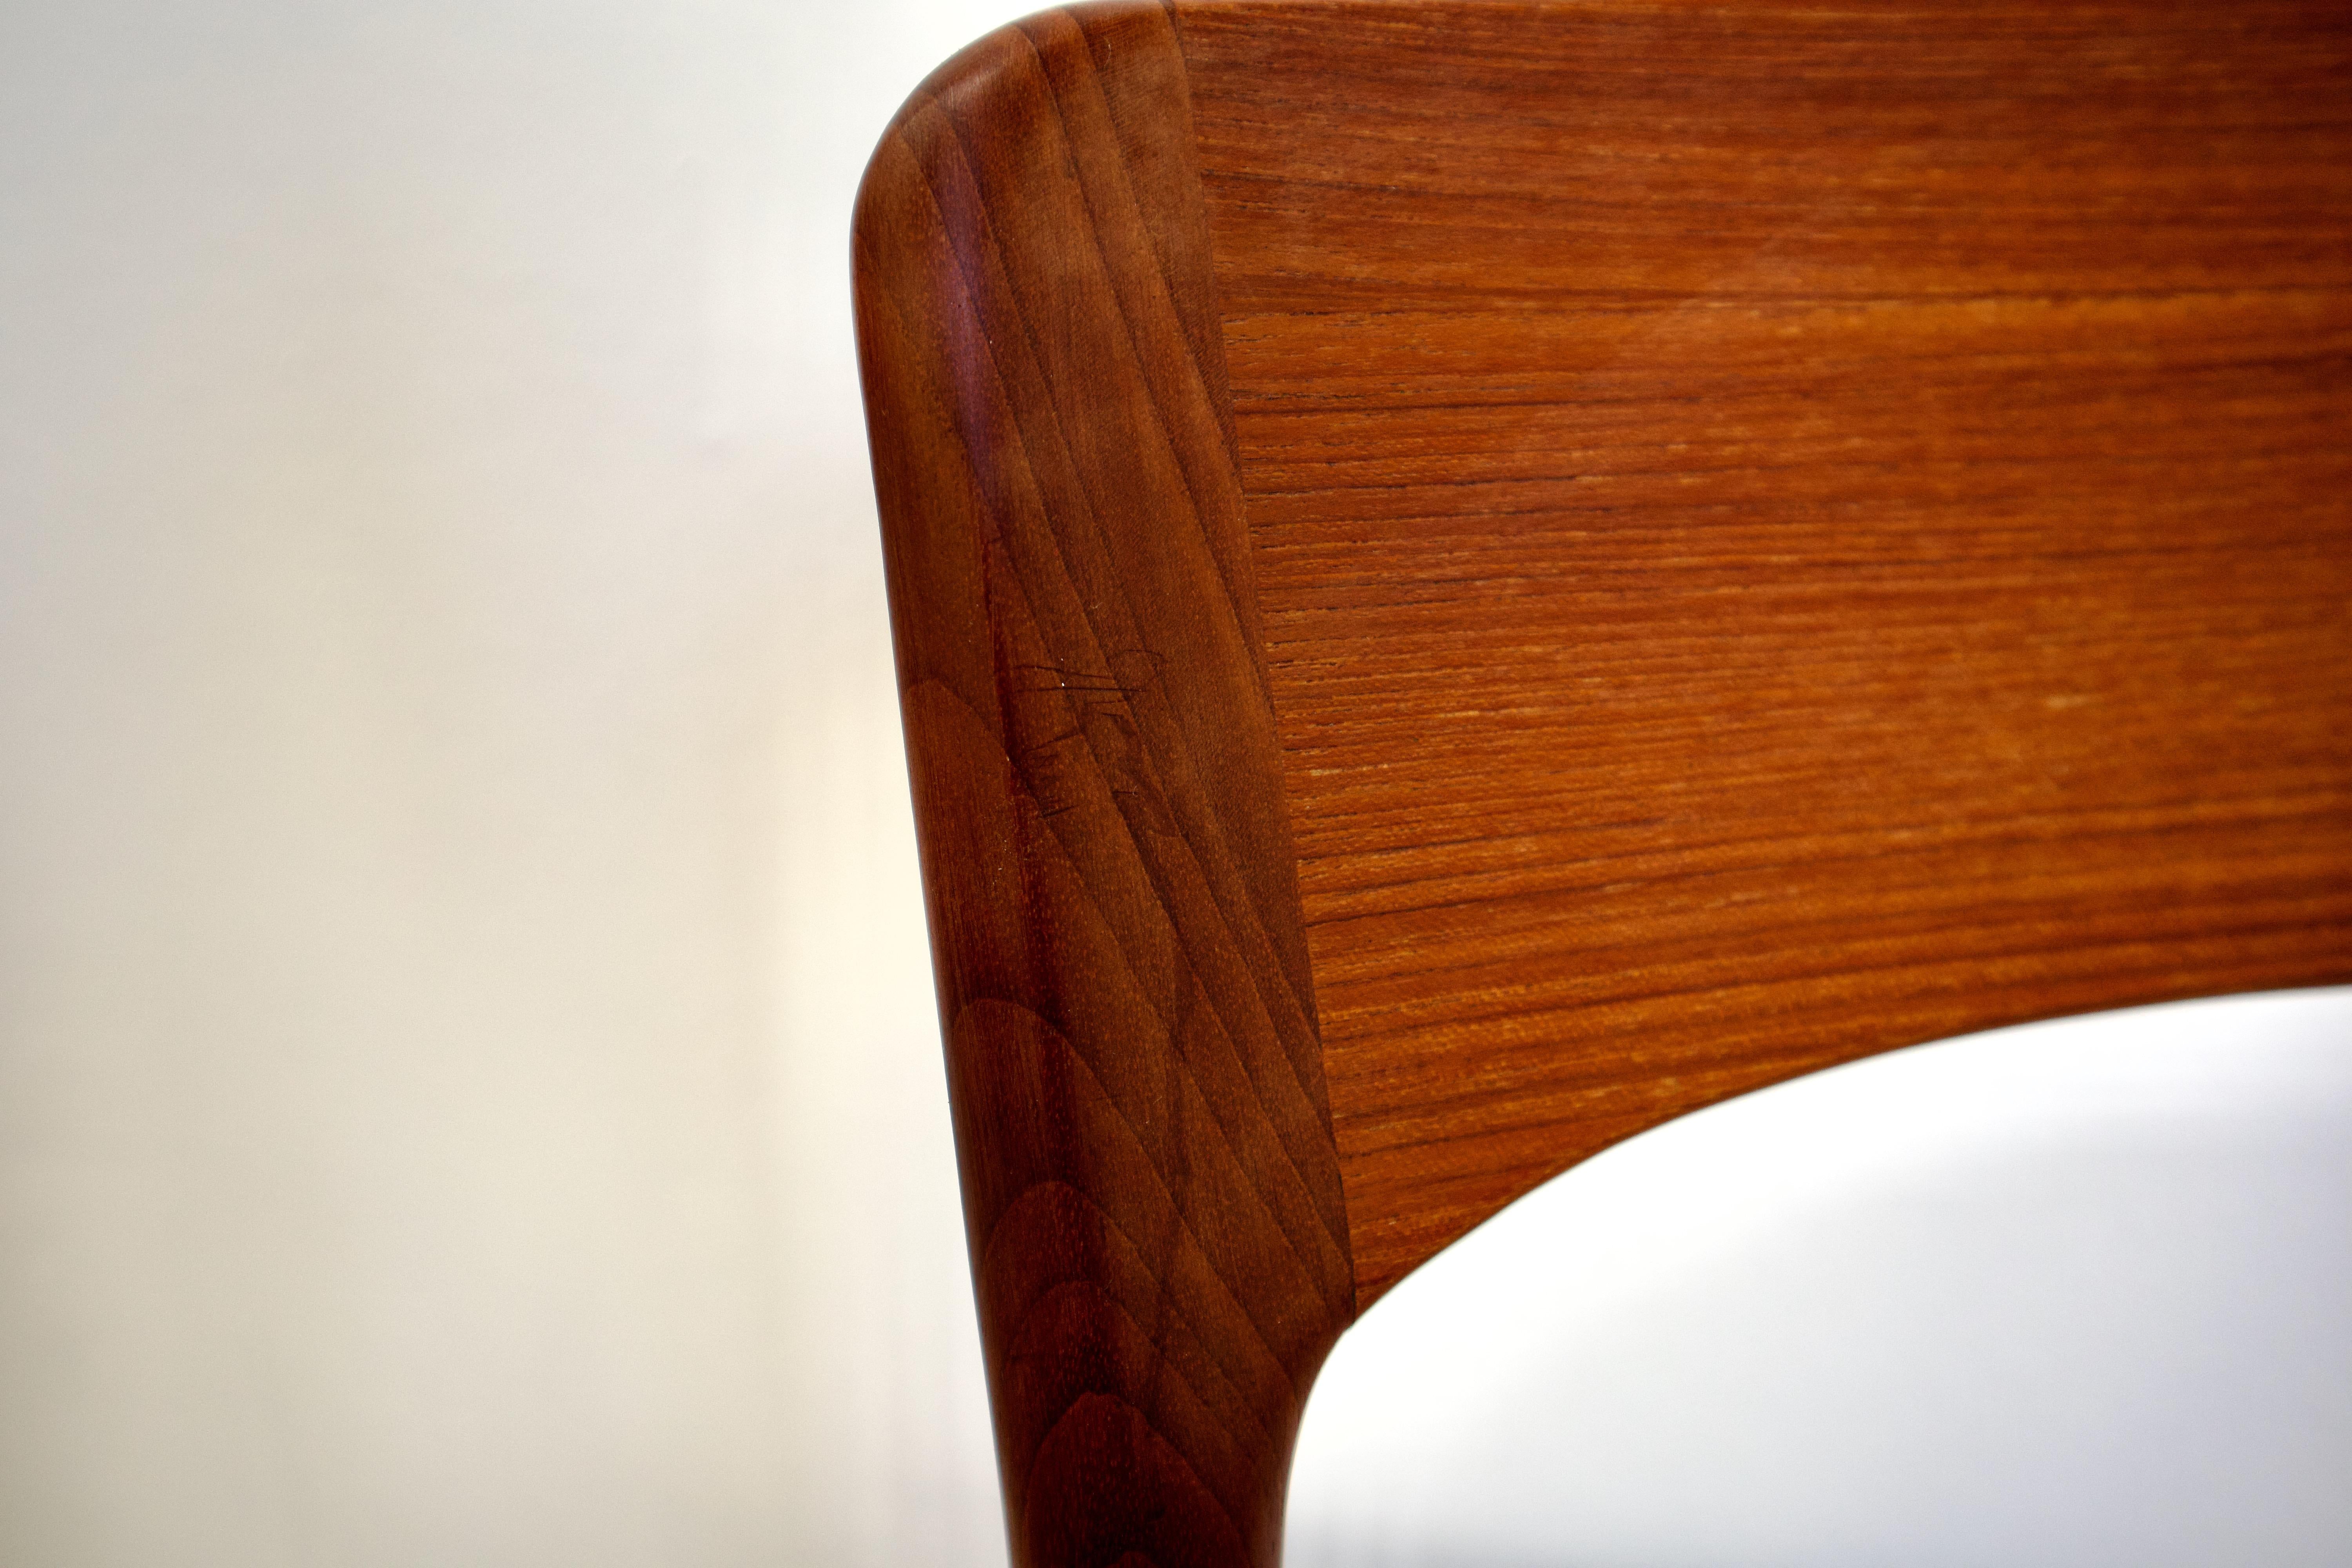 Quirky 1960s Danish Teak Chairs By Kai Kristiansen for K.S. Mobler For Sale 4